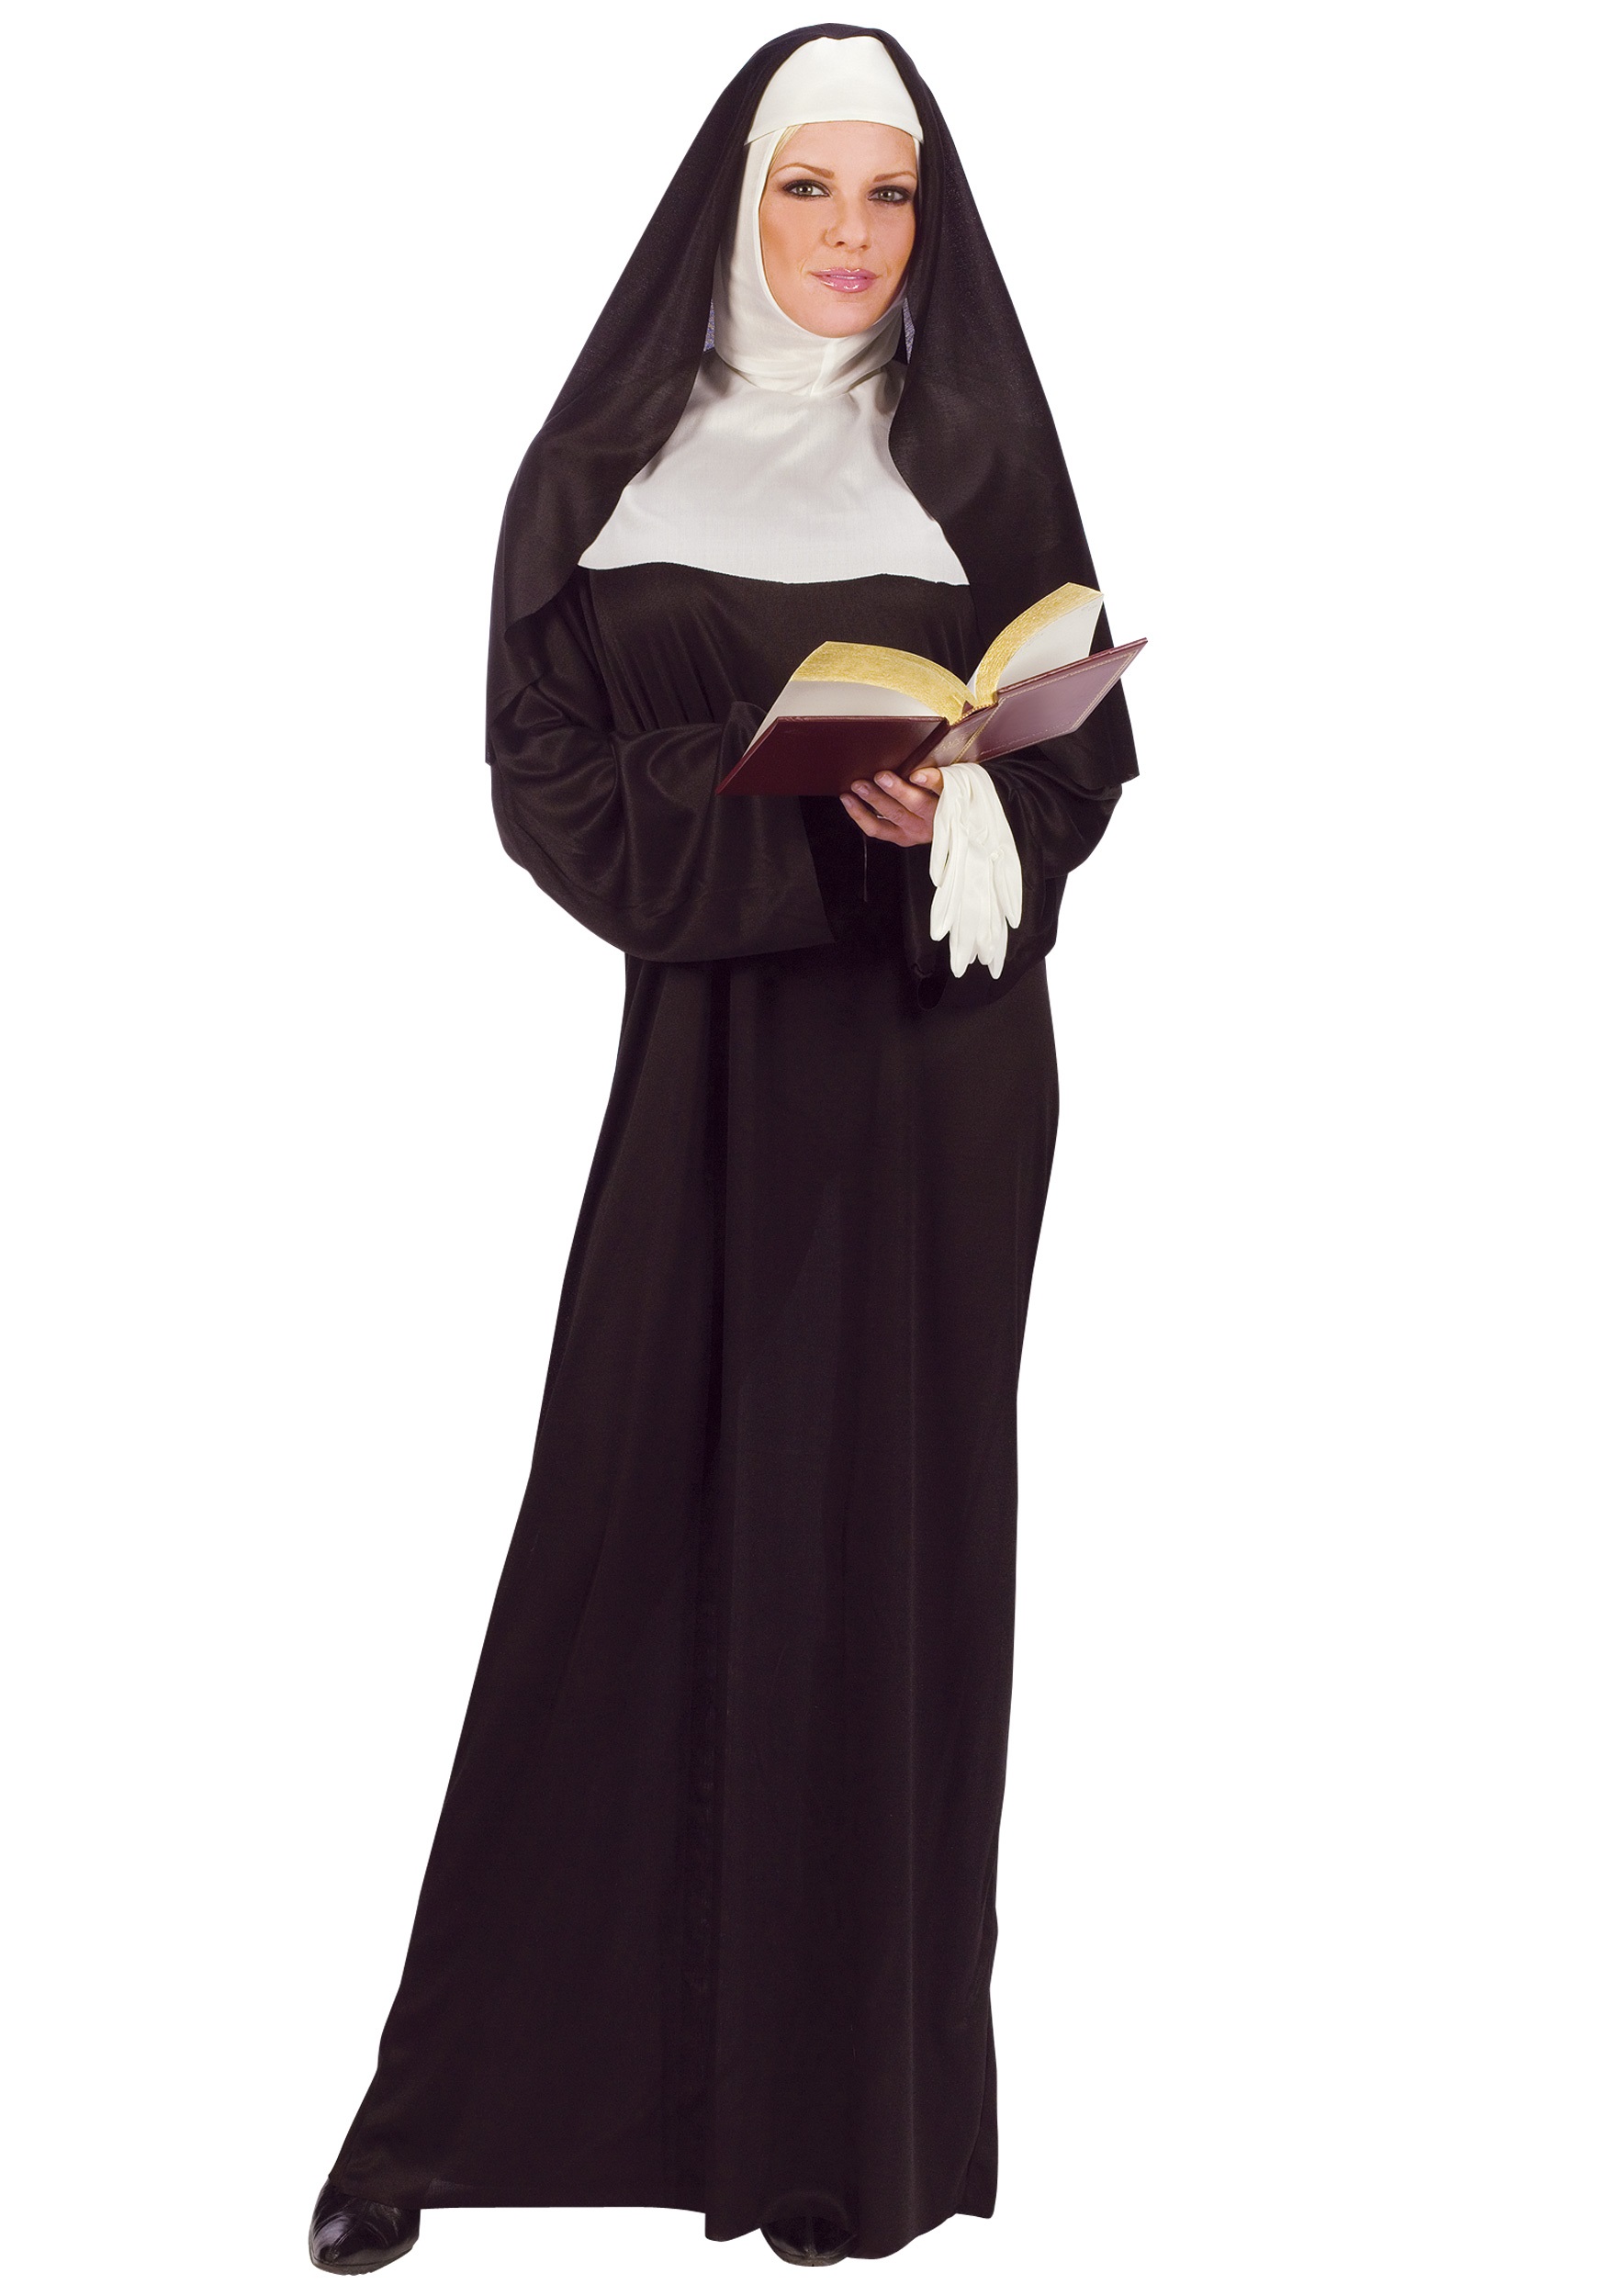 Mother Superior Nun Costume for Women